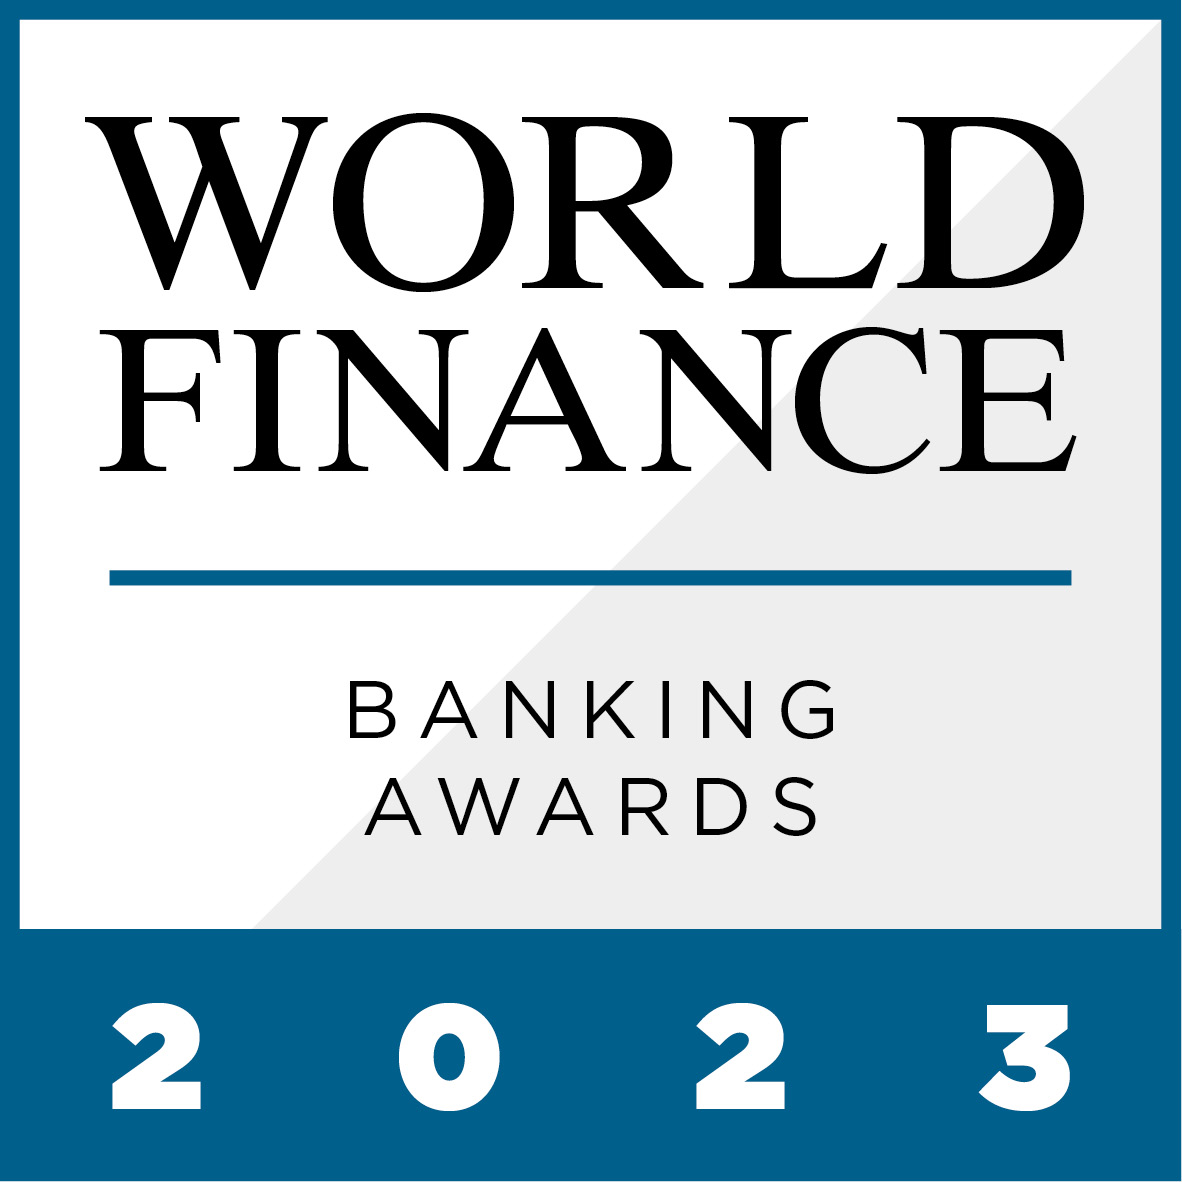 The World Finance banking awards recognise those who are best placed to set an example and lead the way through this uncertain macroeconomic period.